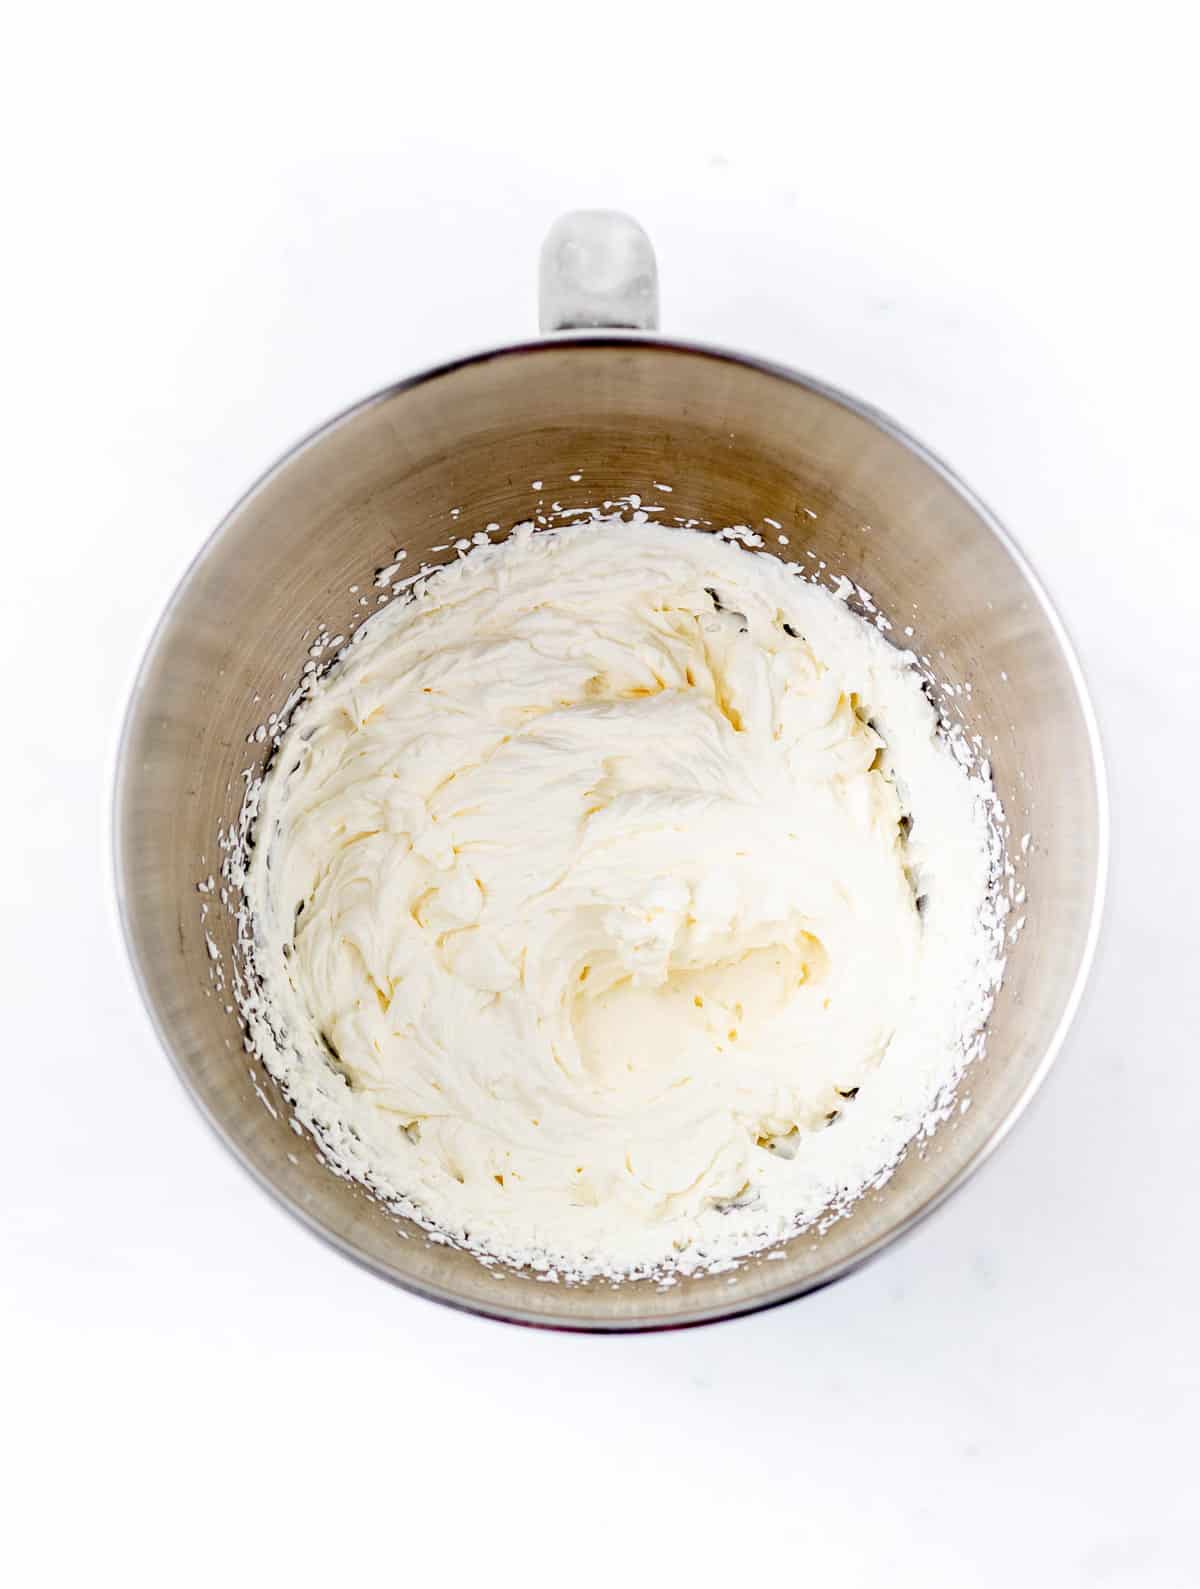 Homemade whipped cream in a large silver bowl.